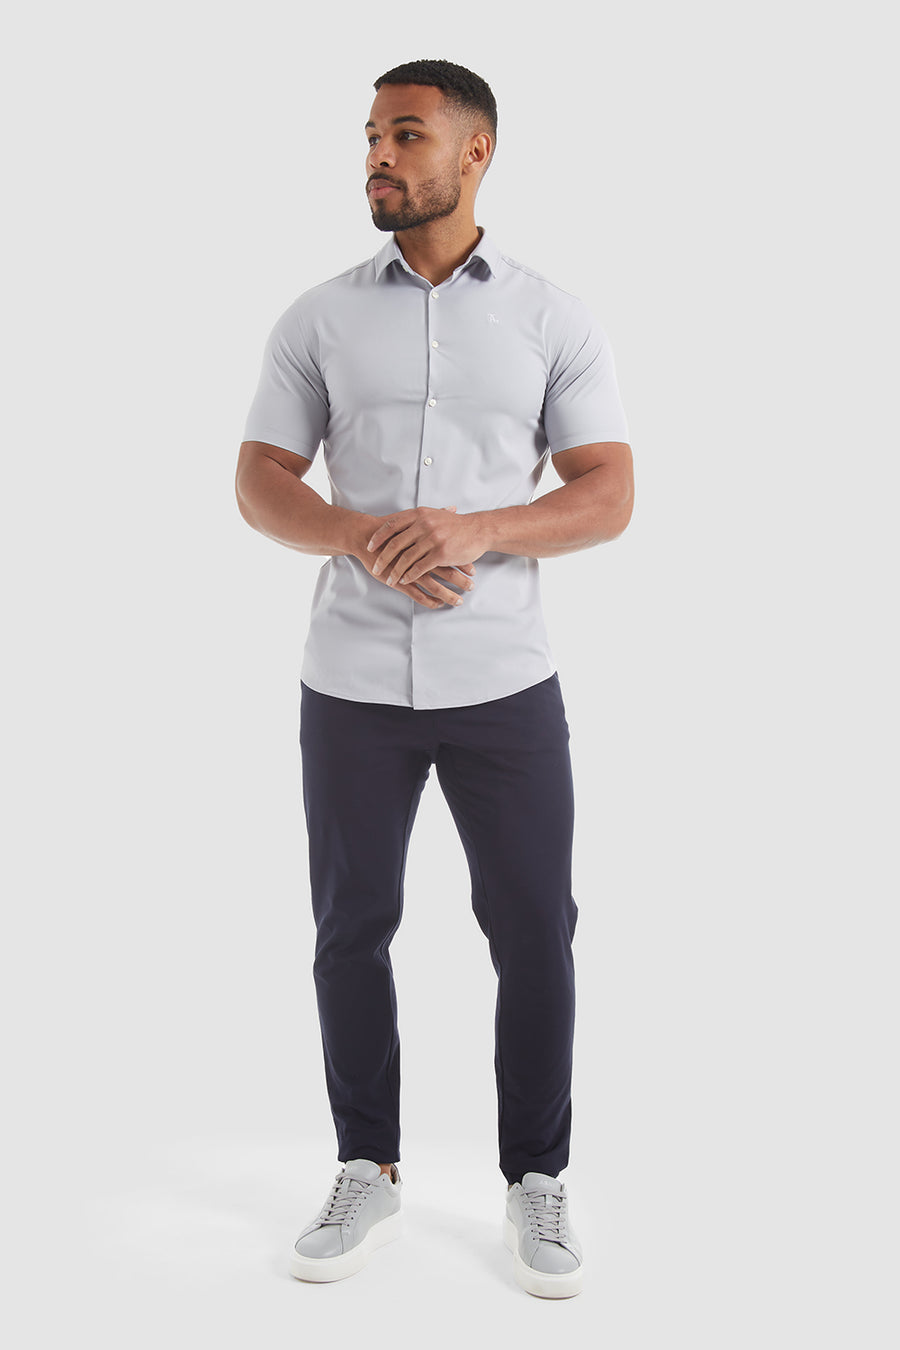 Athletic Fit Bamboo Short Sleeve Shirt in Grey - TAILORED ATHLETE - USA